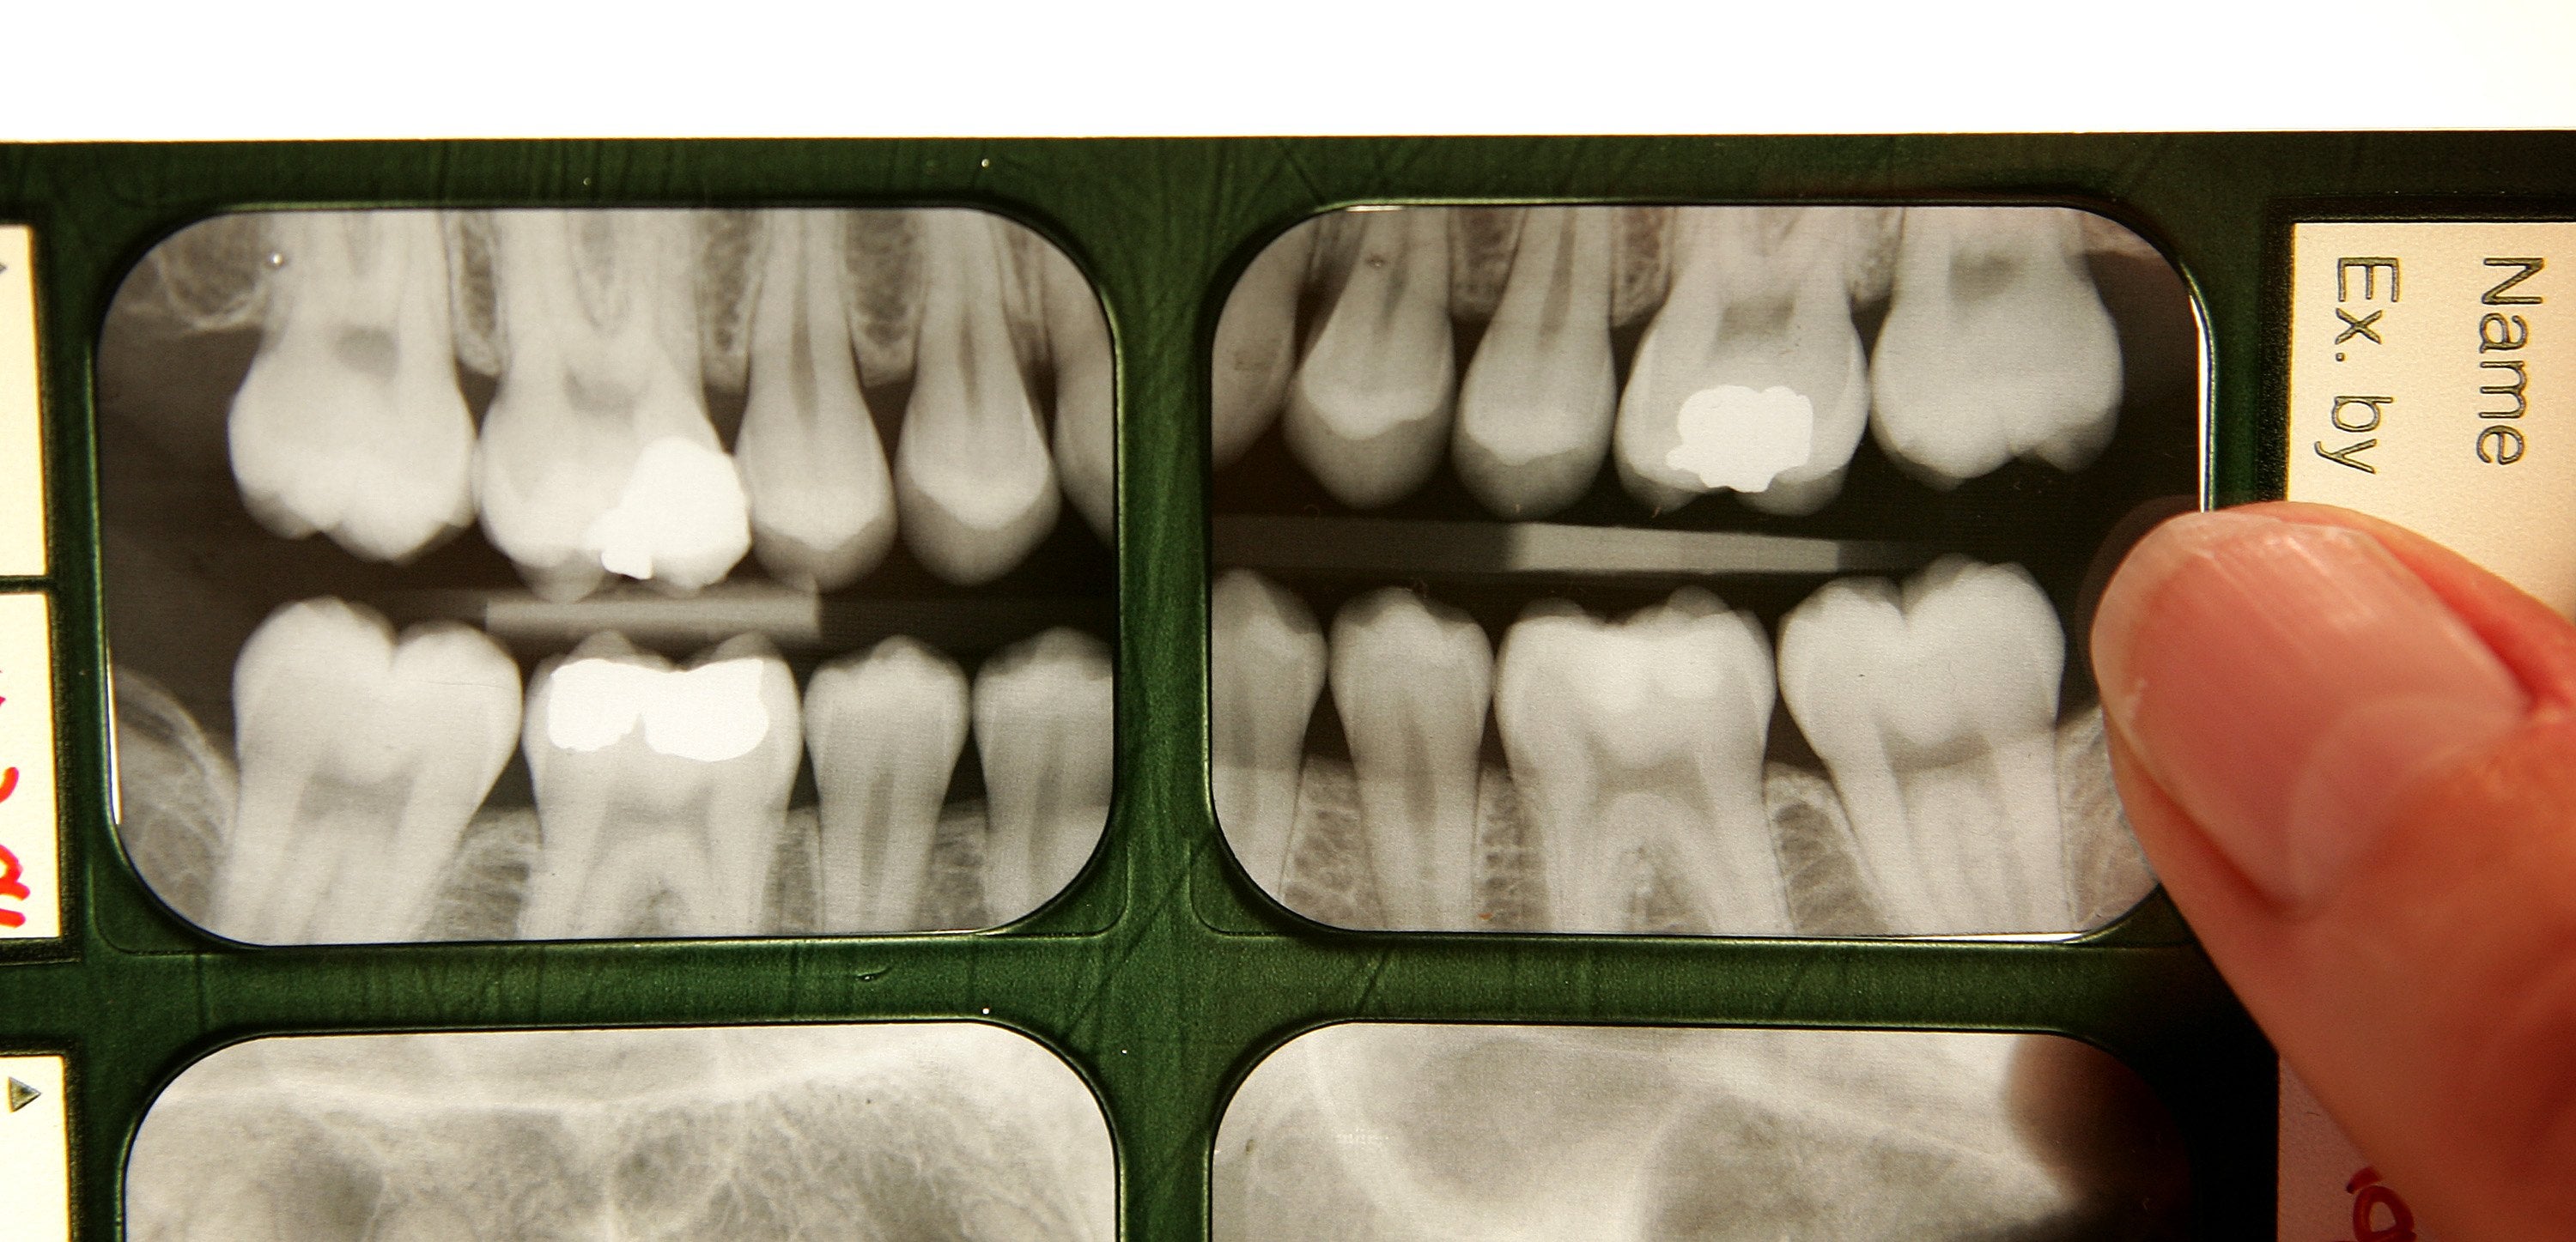 Dental X-rays are displayed on a light box